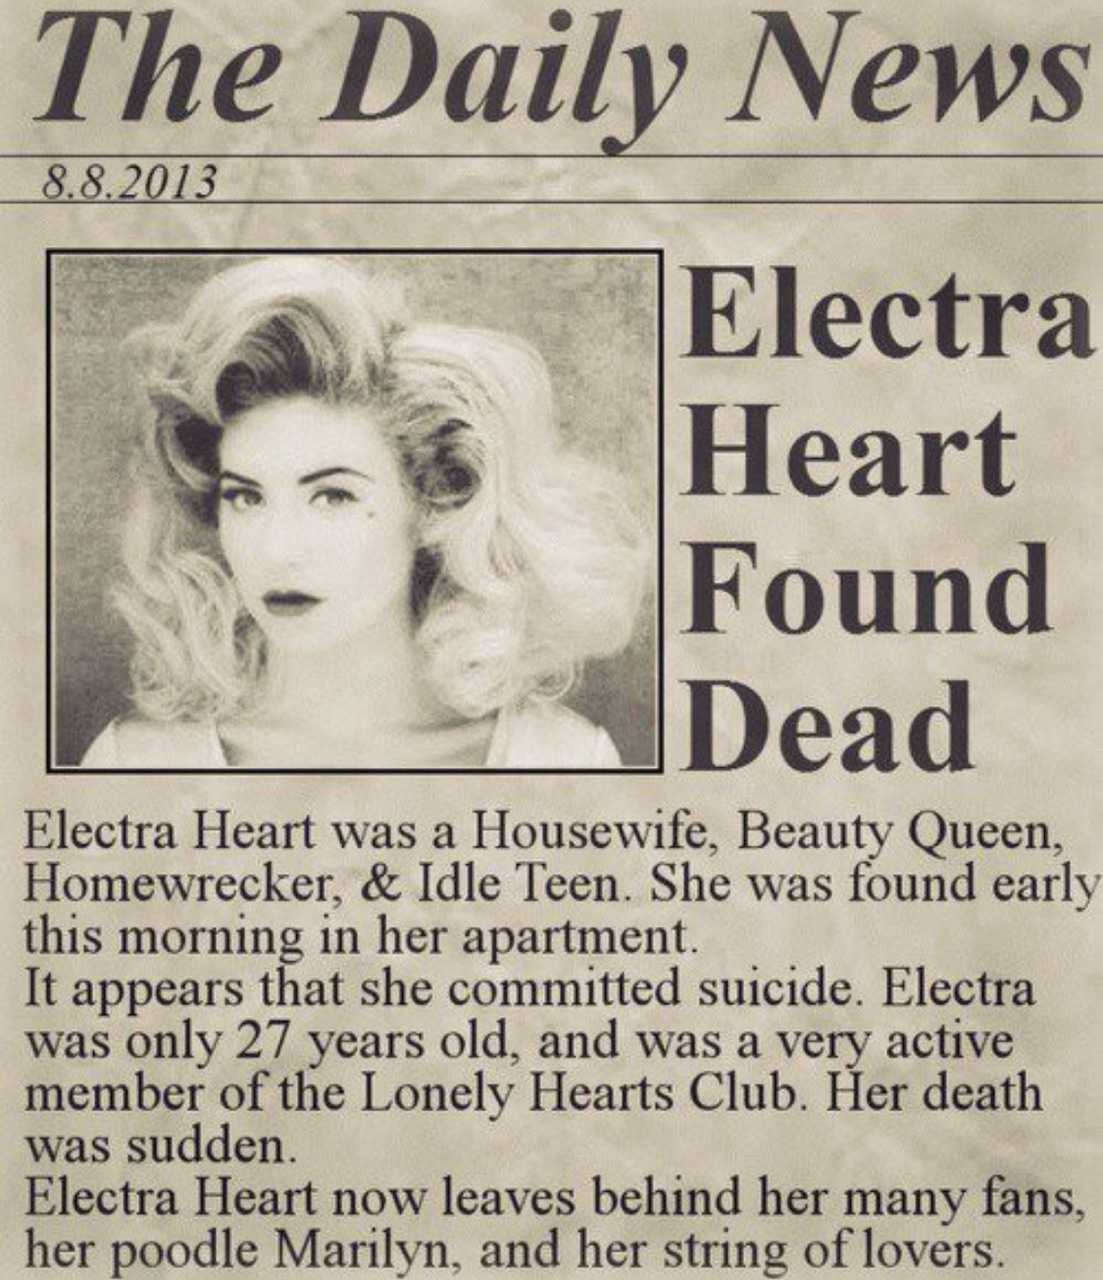 image about electra heart. See more about marina and the diamonds, aesthetic and pink